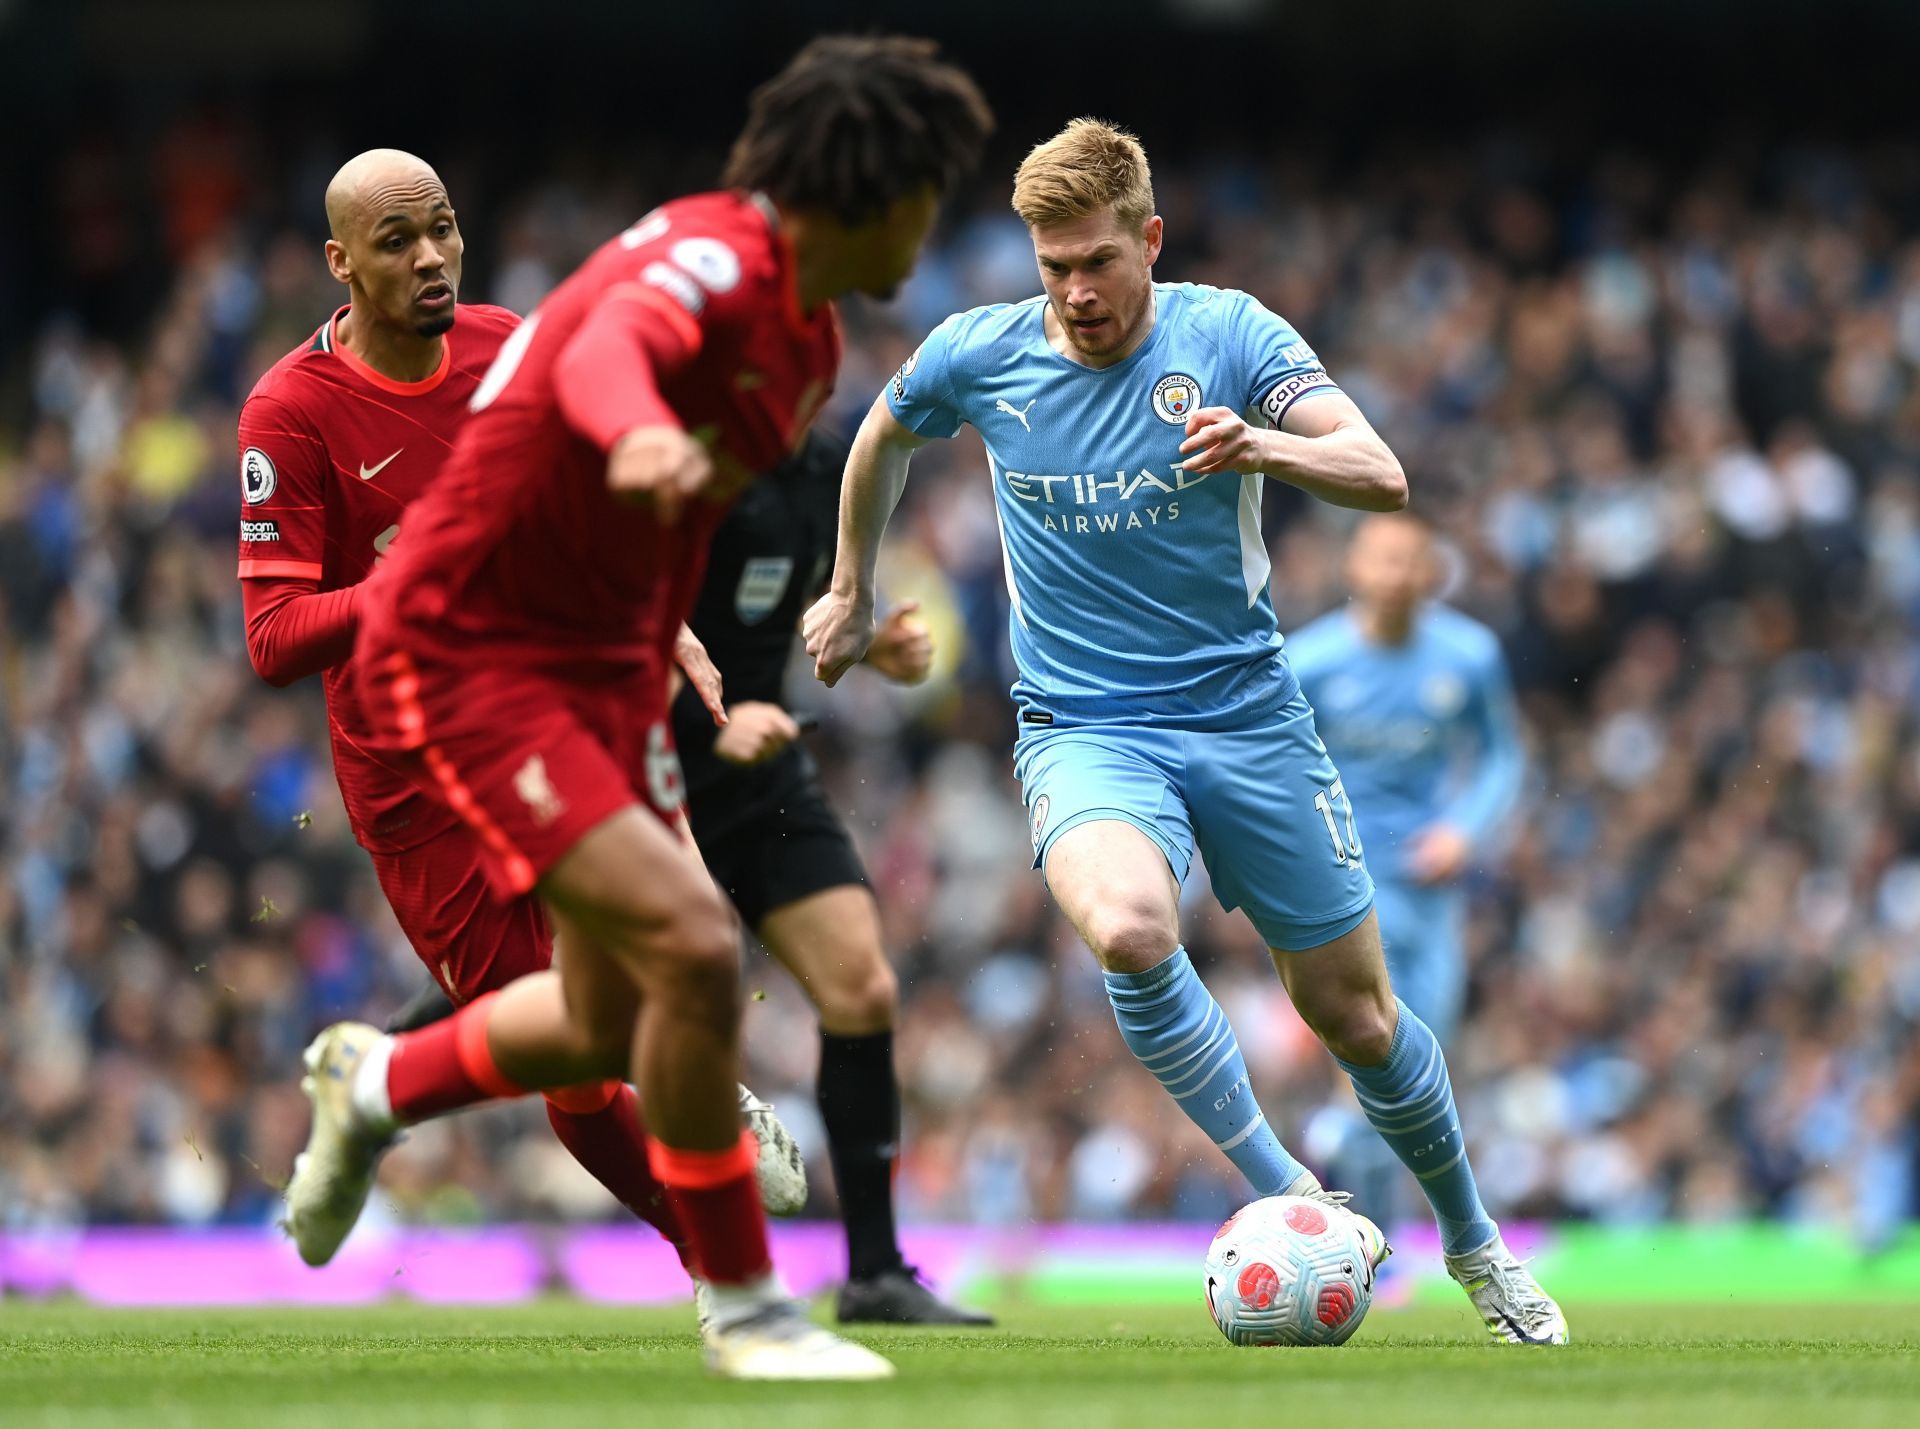 Kevin de Bruyne opened the scoring in the fifth minute against Liverpool.